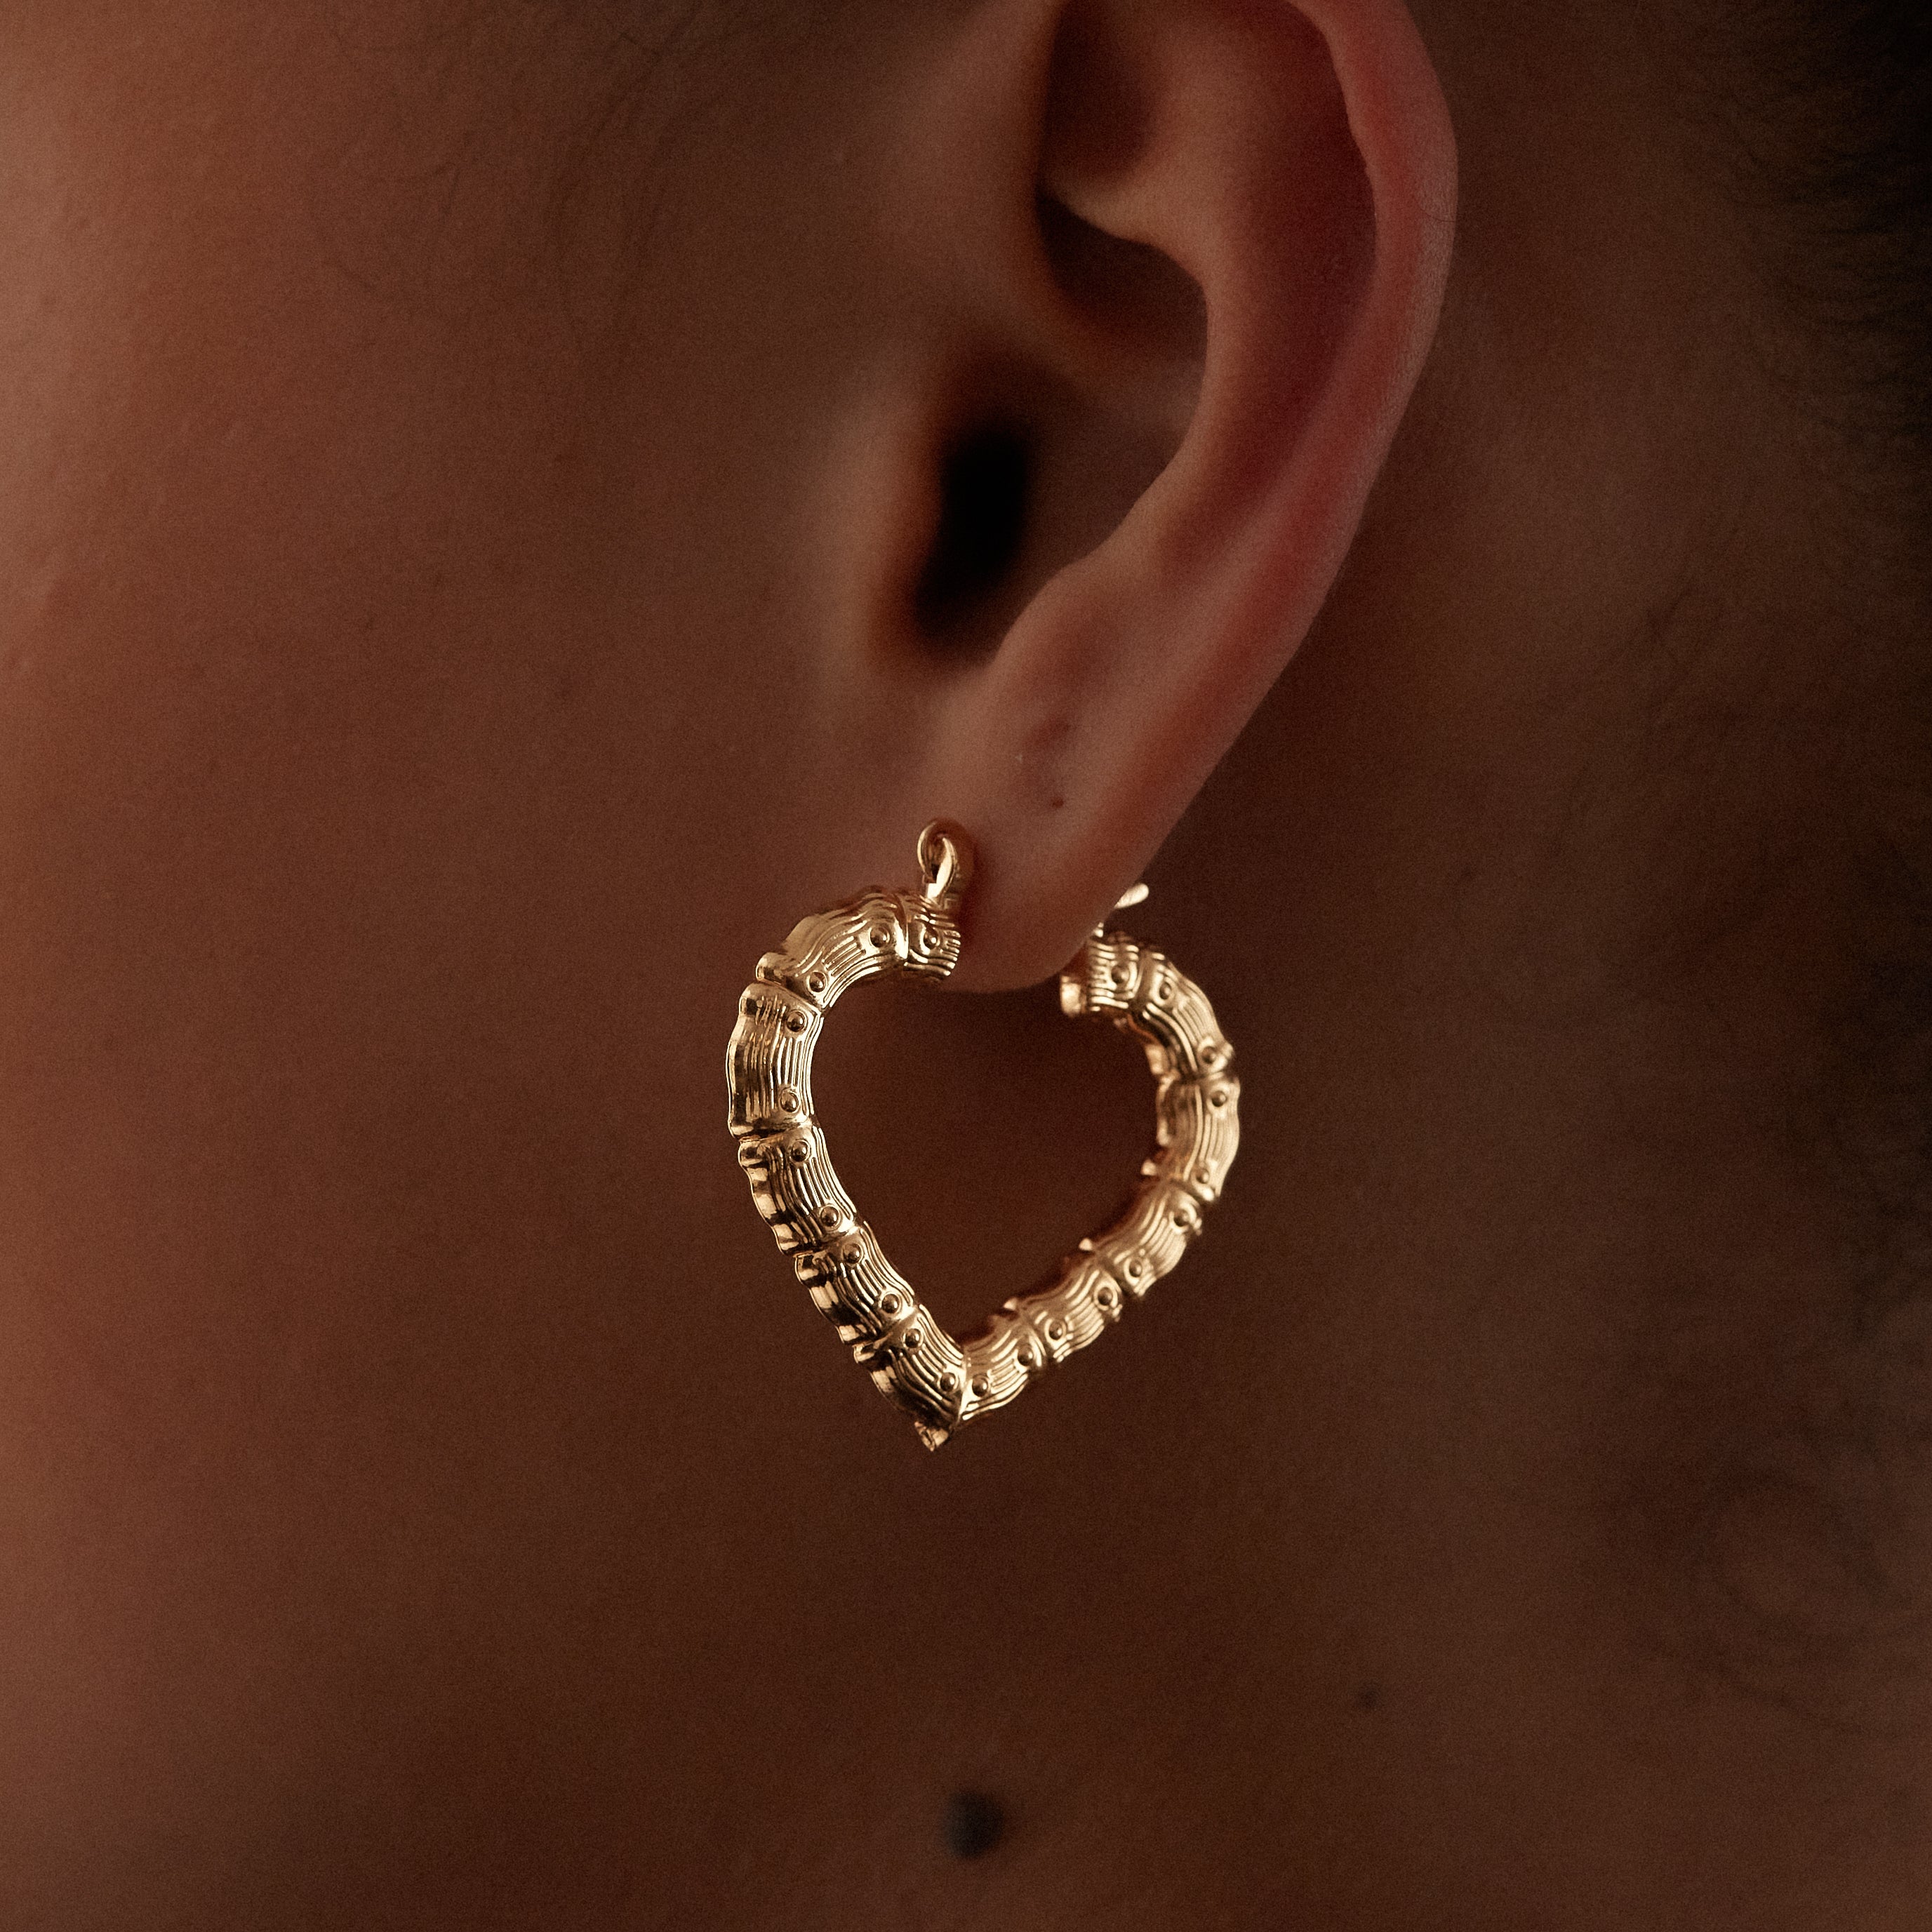 Buy 18K Small Bamboo Shaped Earringsgold Filled Hoops Online in India   Etsy